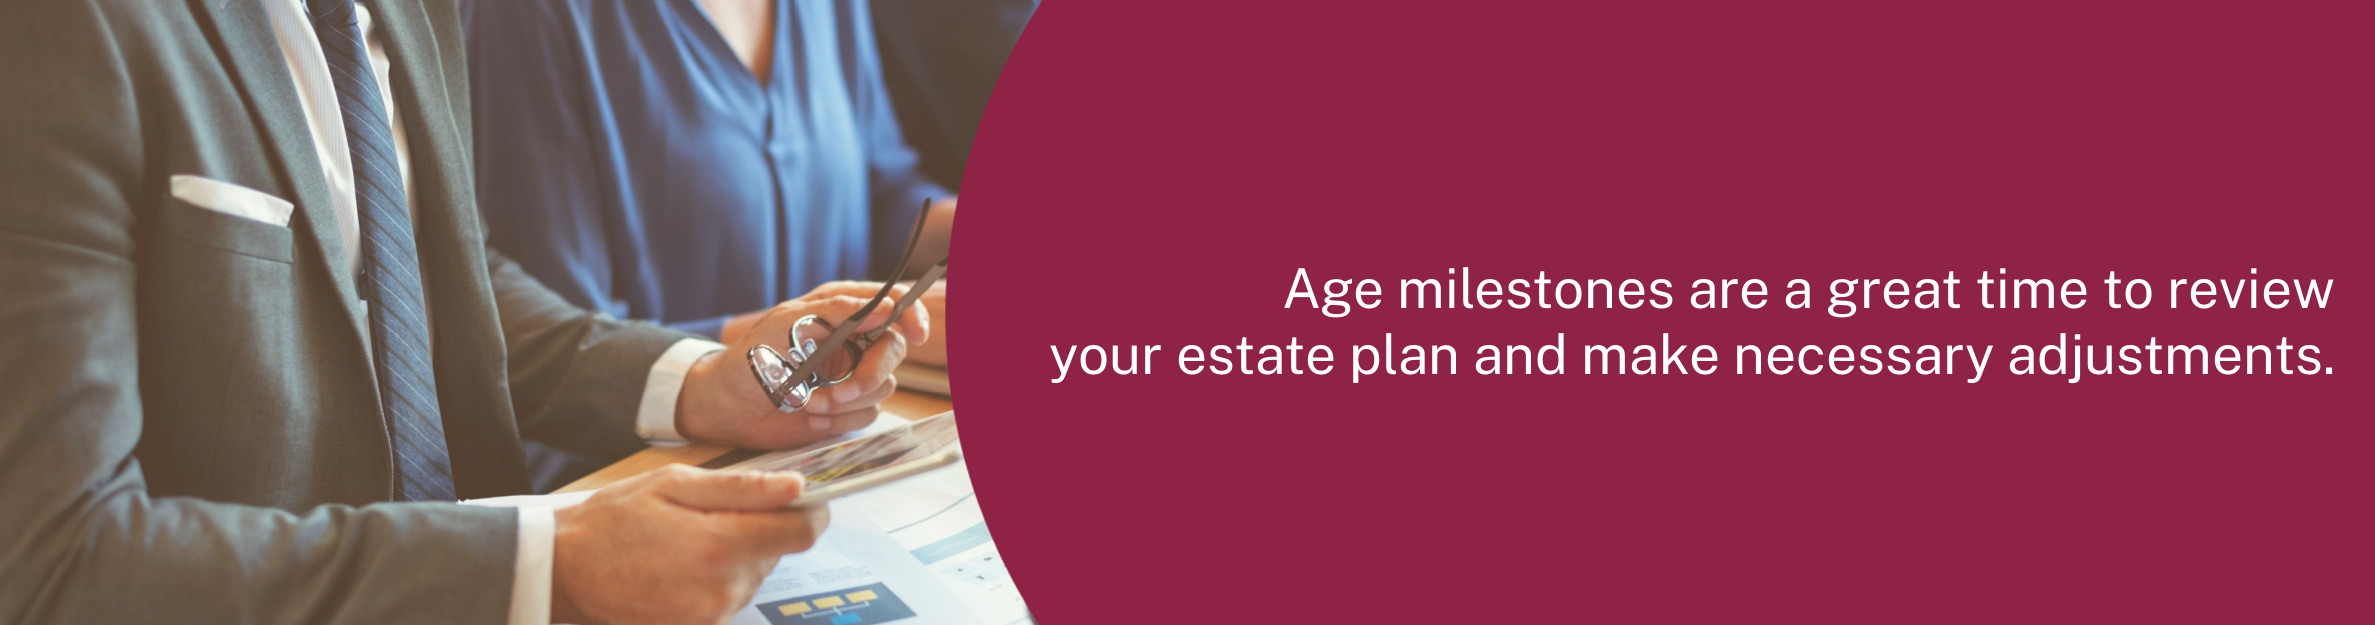 Photo: Business people working
Text: Age milestones are a great time to review your estate plan and make necessary adjustments.